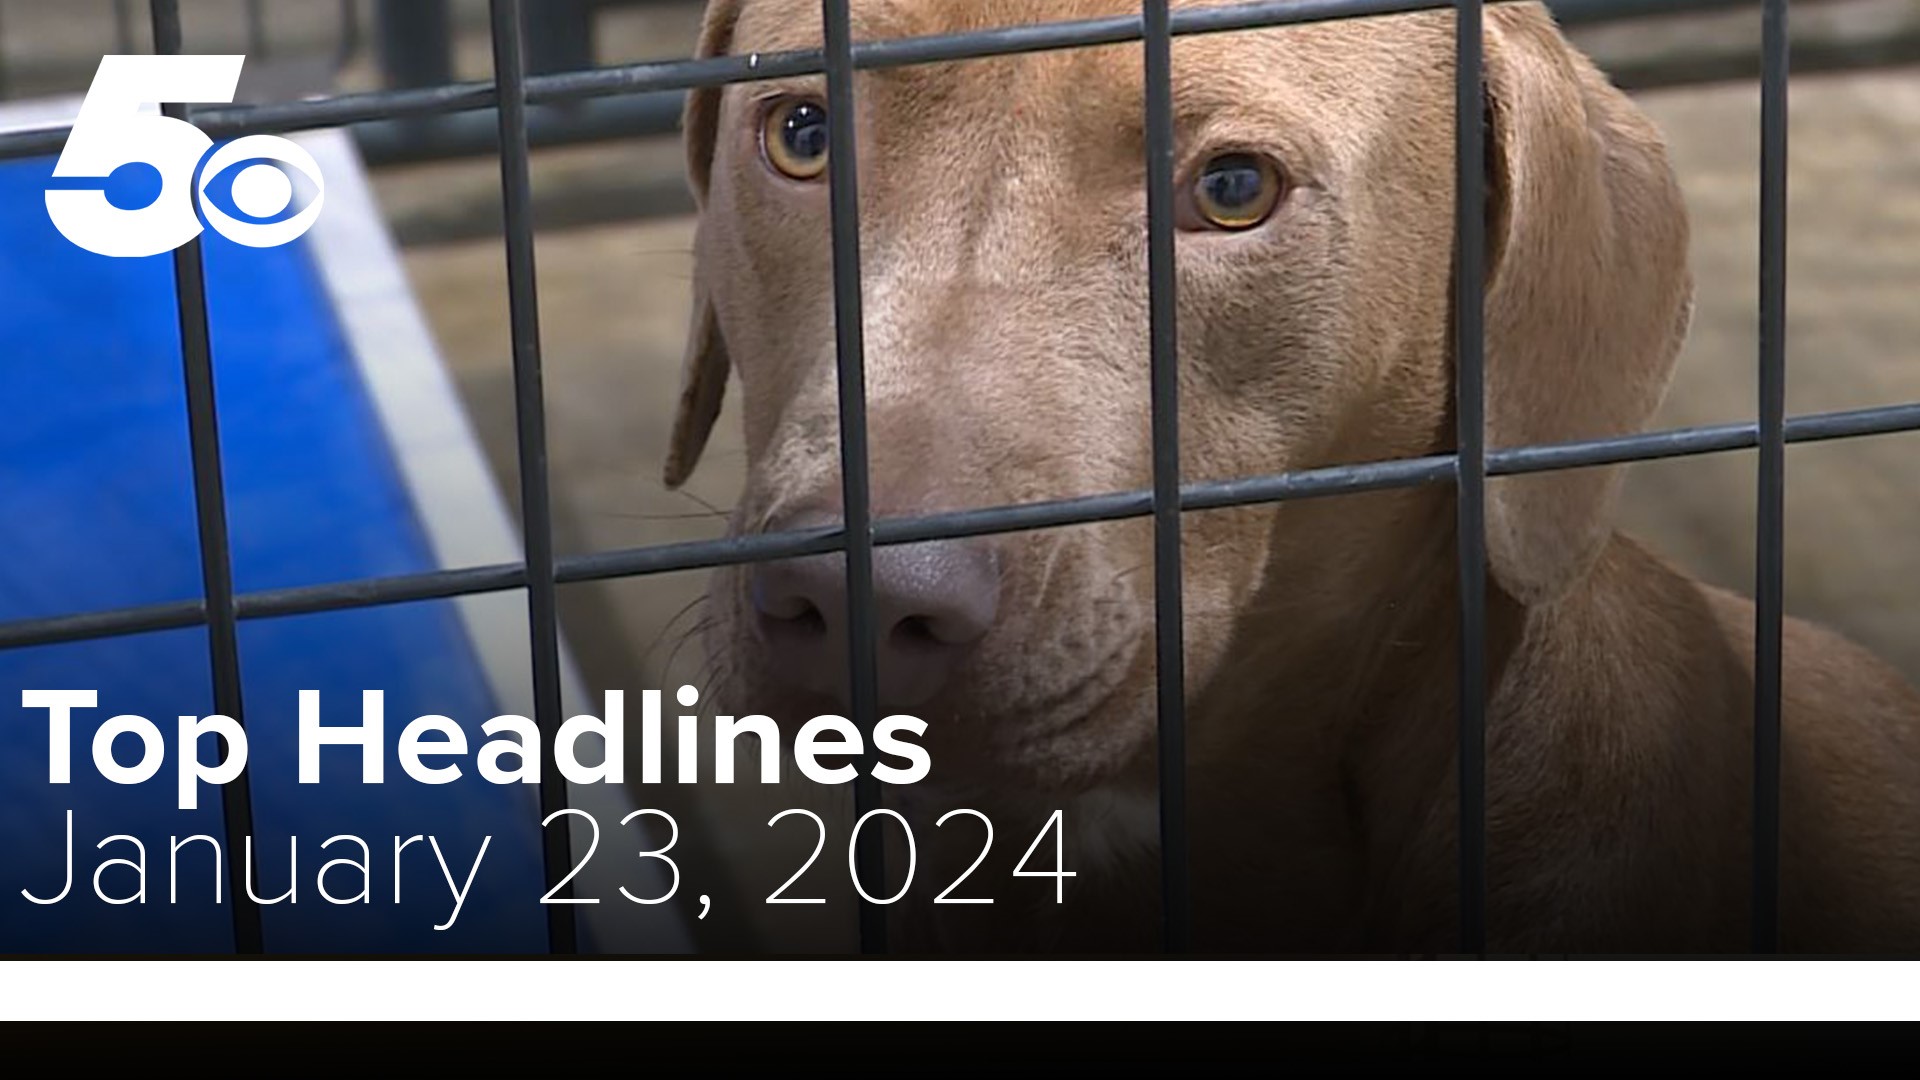 Watch today's top headlines to learn more about free spaying and neutering in Fort Smith.